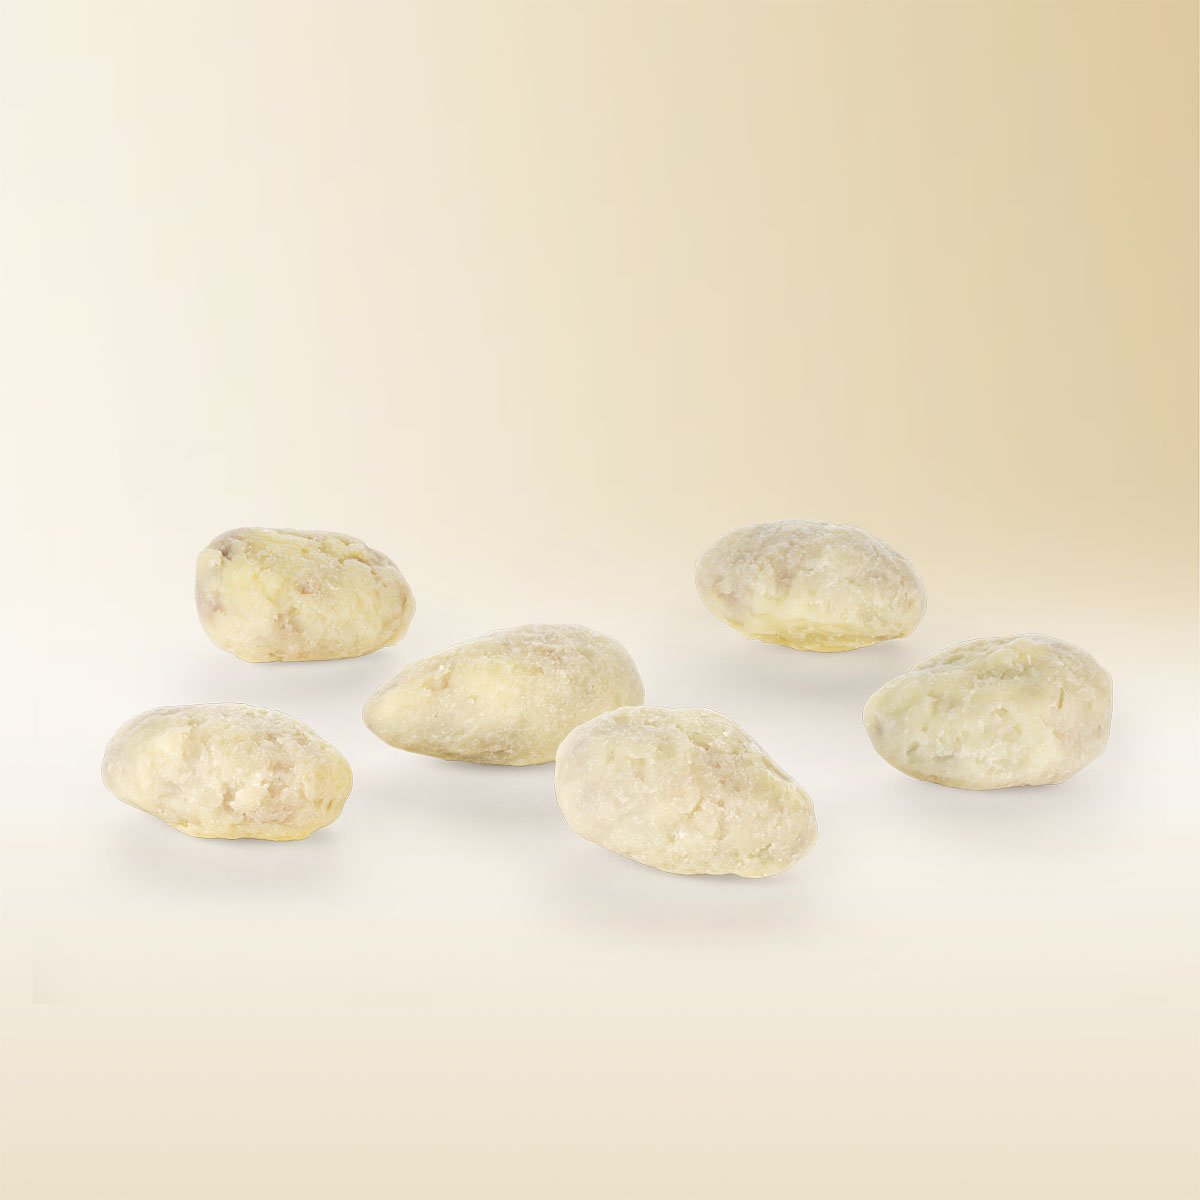 Roasted almonds with white chocolate, 150g